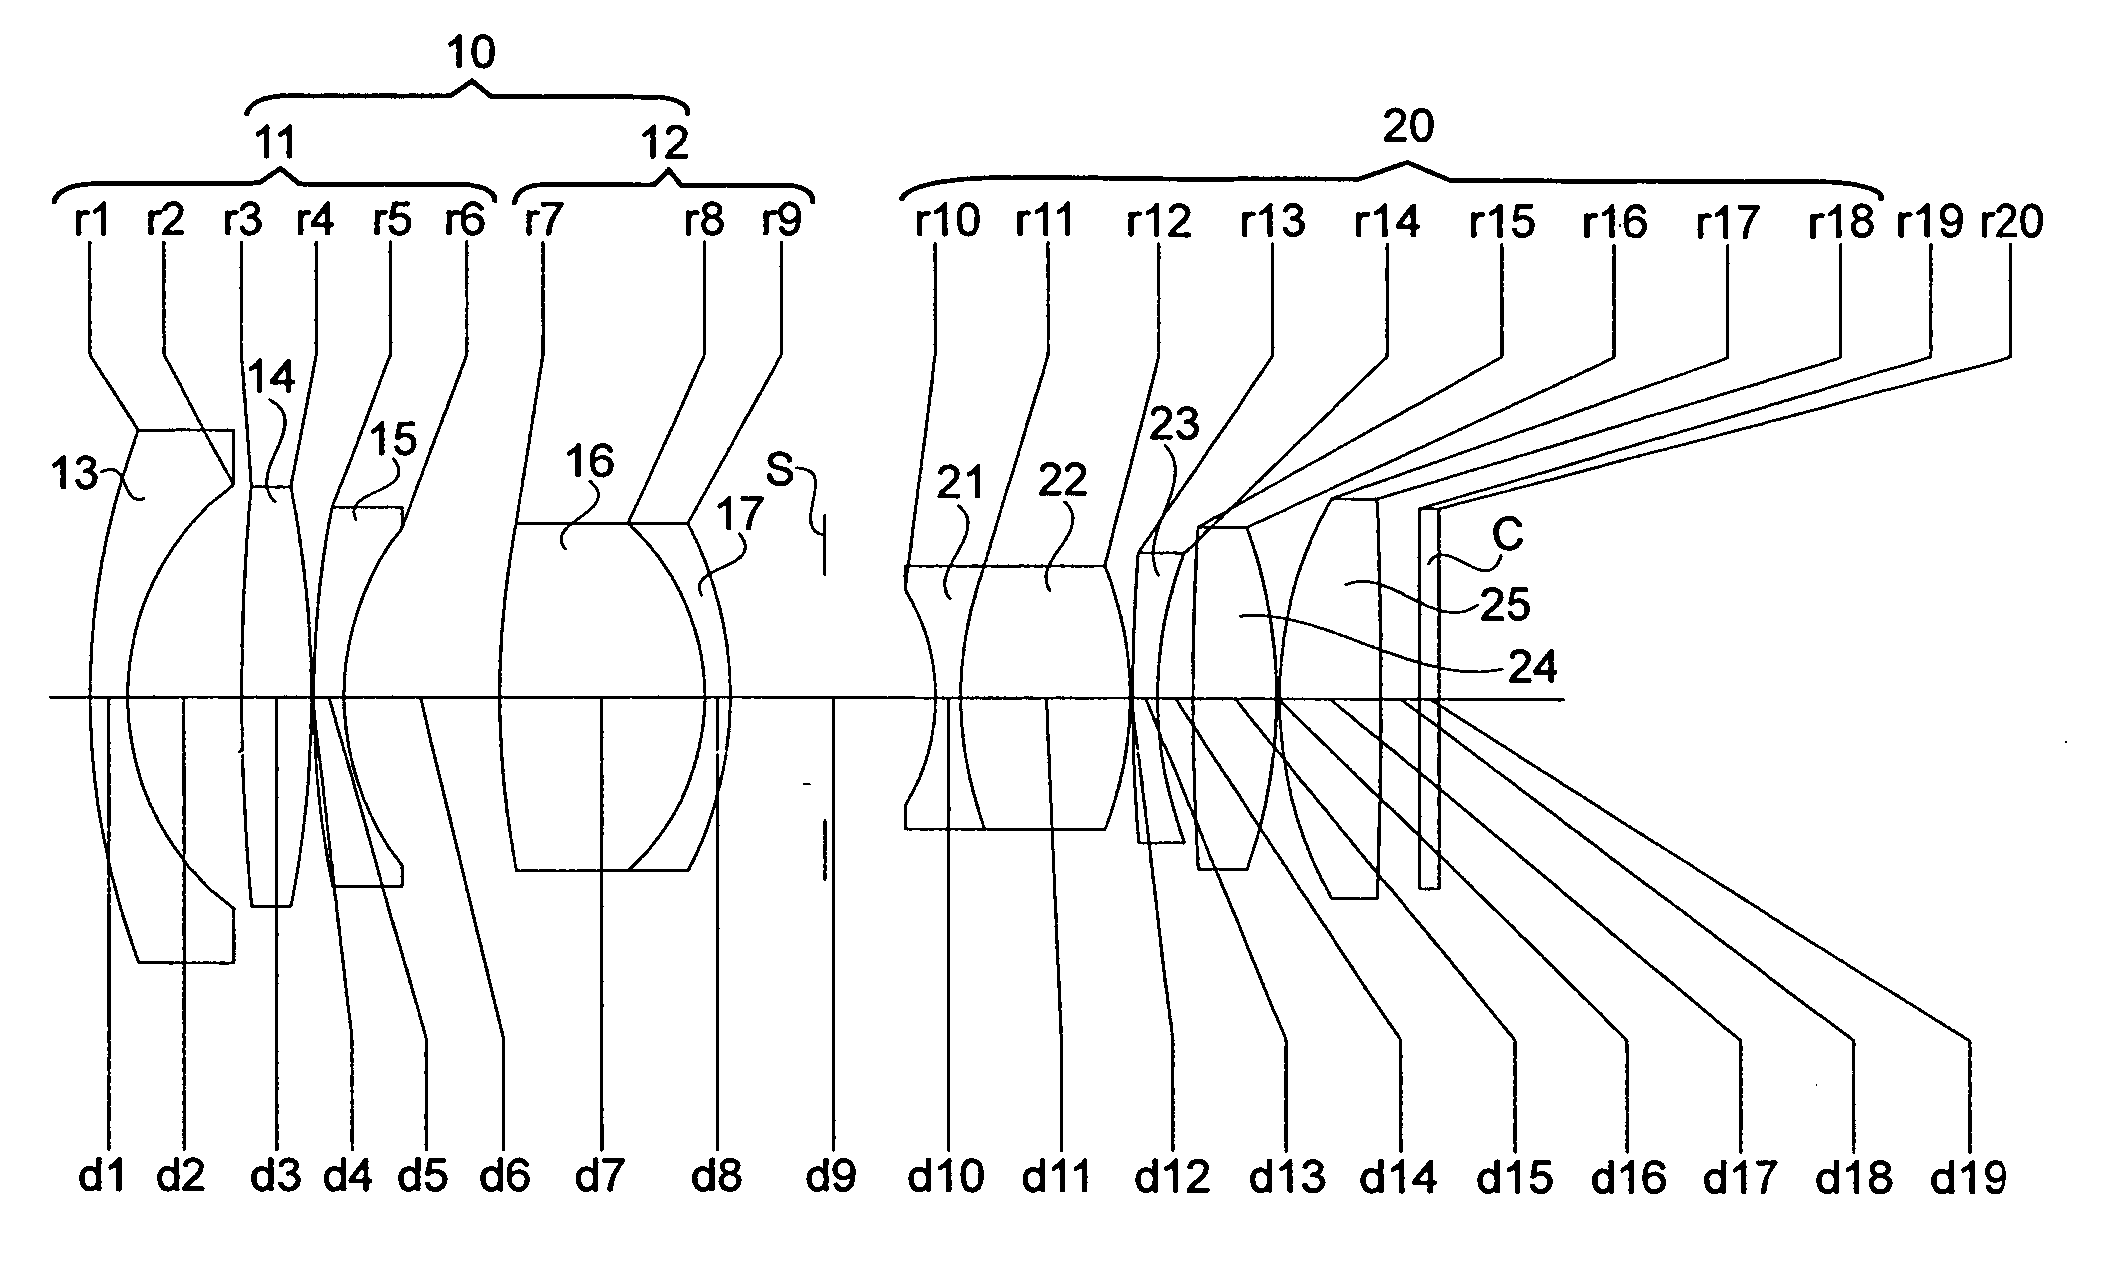 Wide-angle lens system